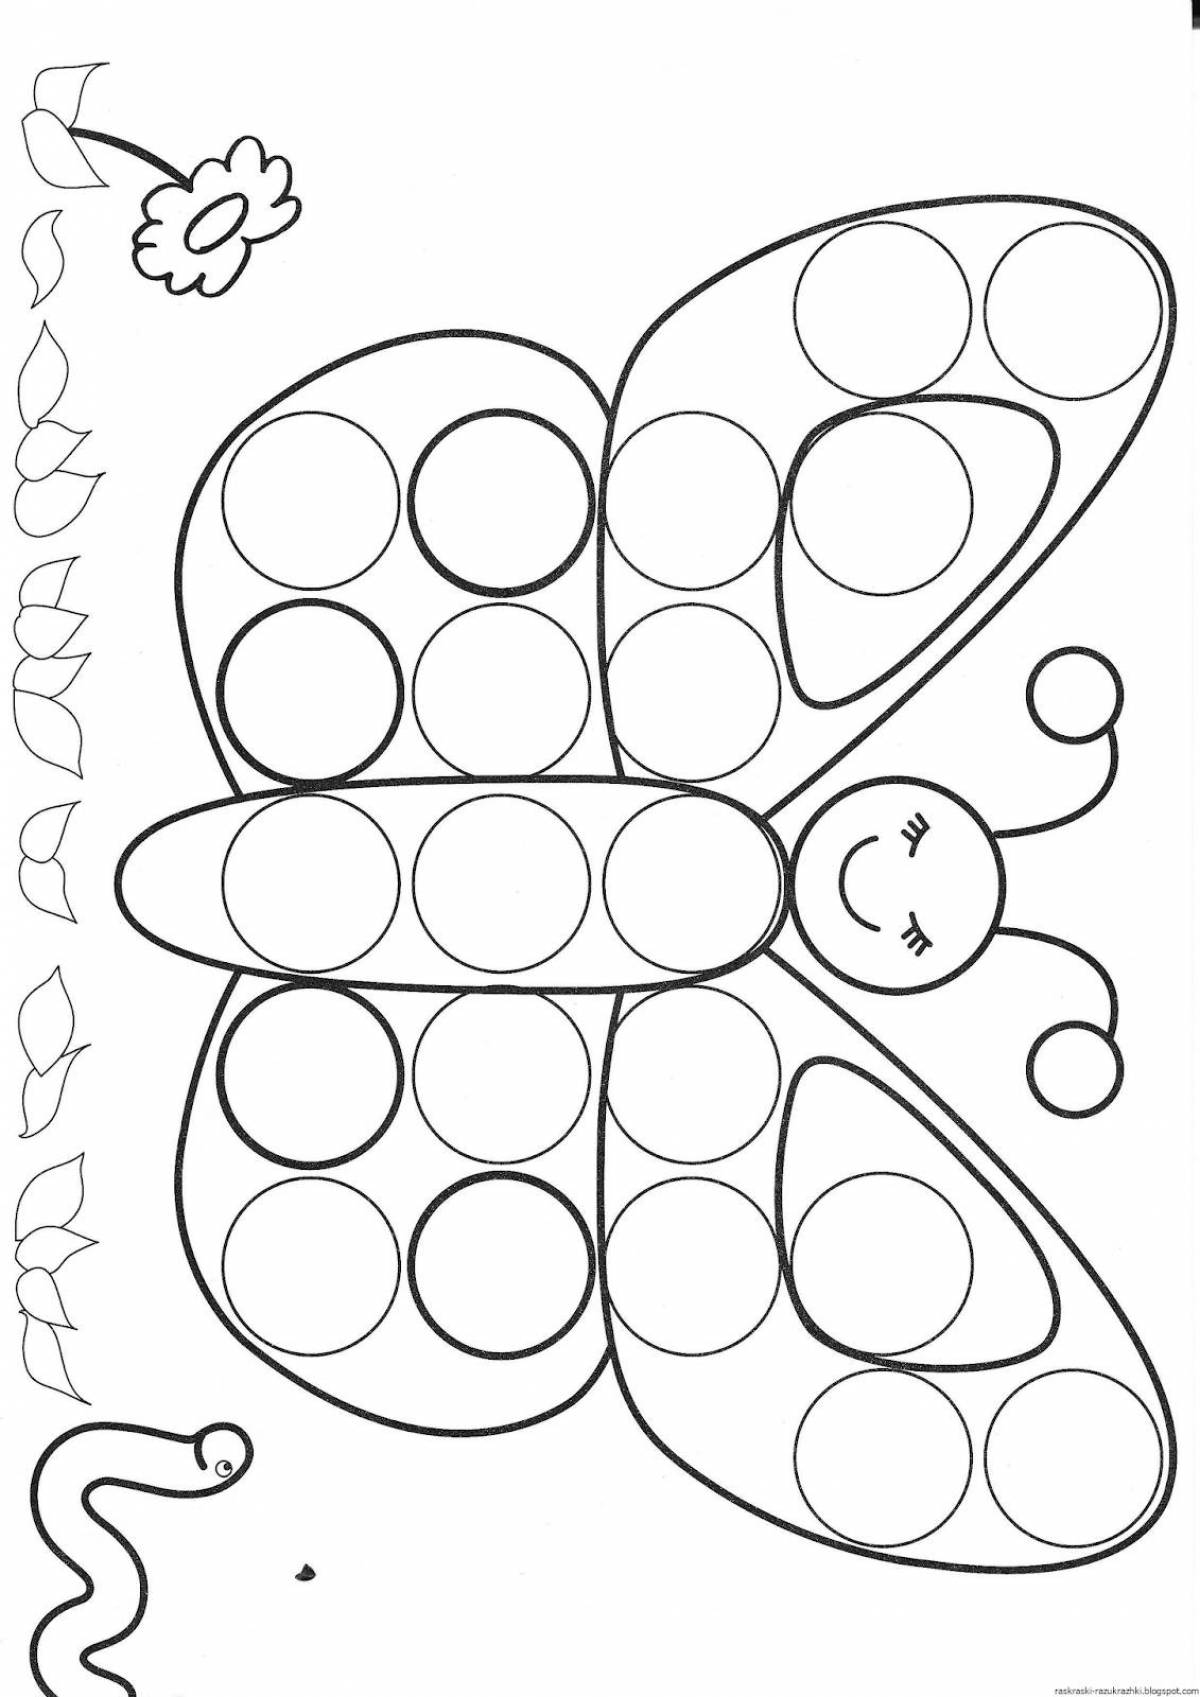 Color-bright finger coloring page